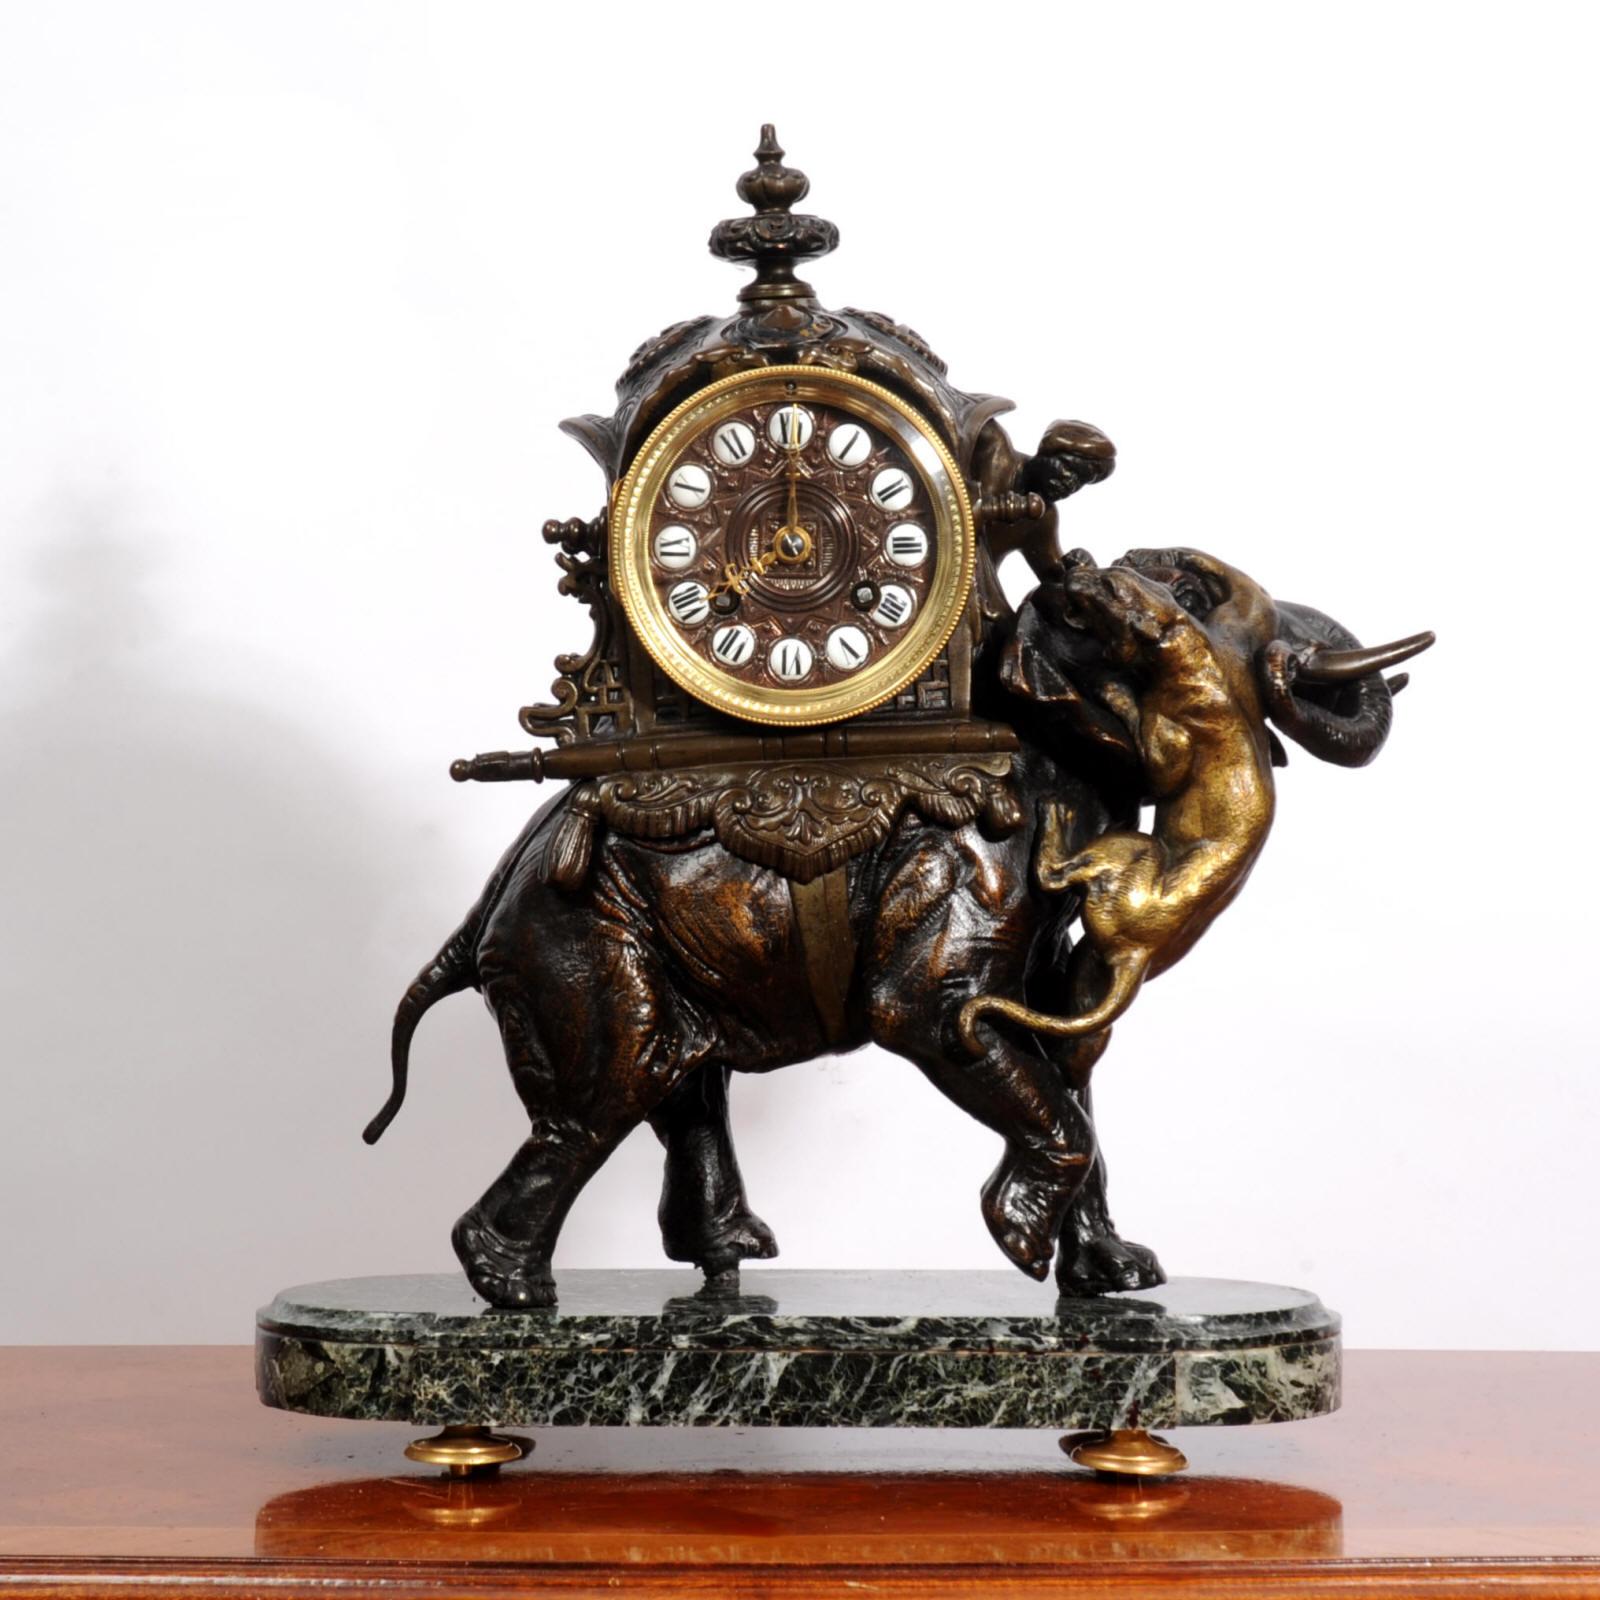 Victorian Antique French Clock - Elephant - The Mahout Fending Off A Tiger